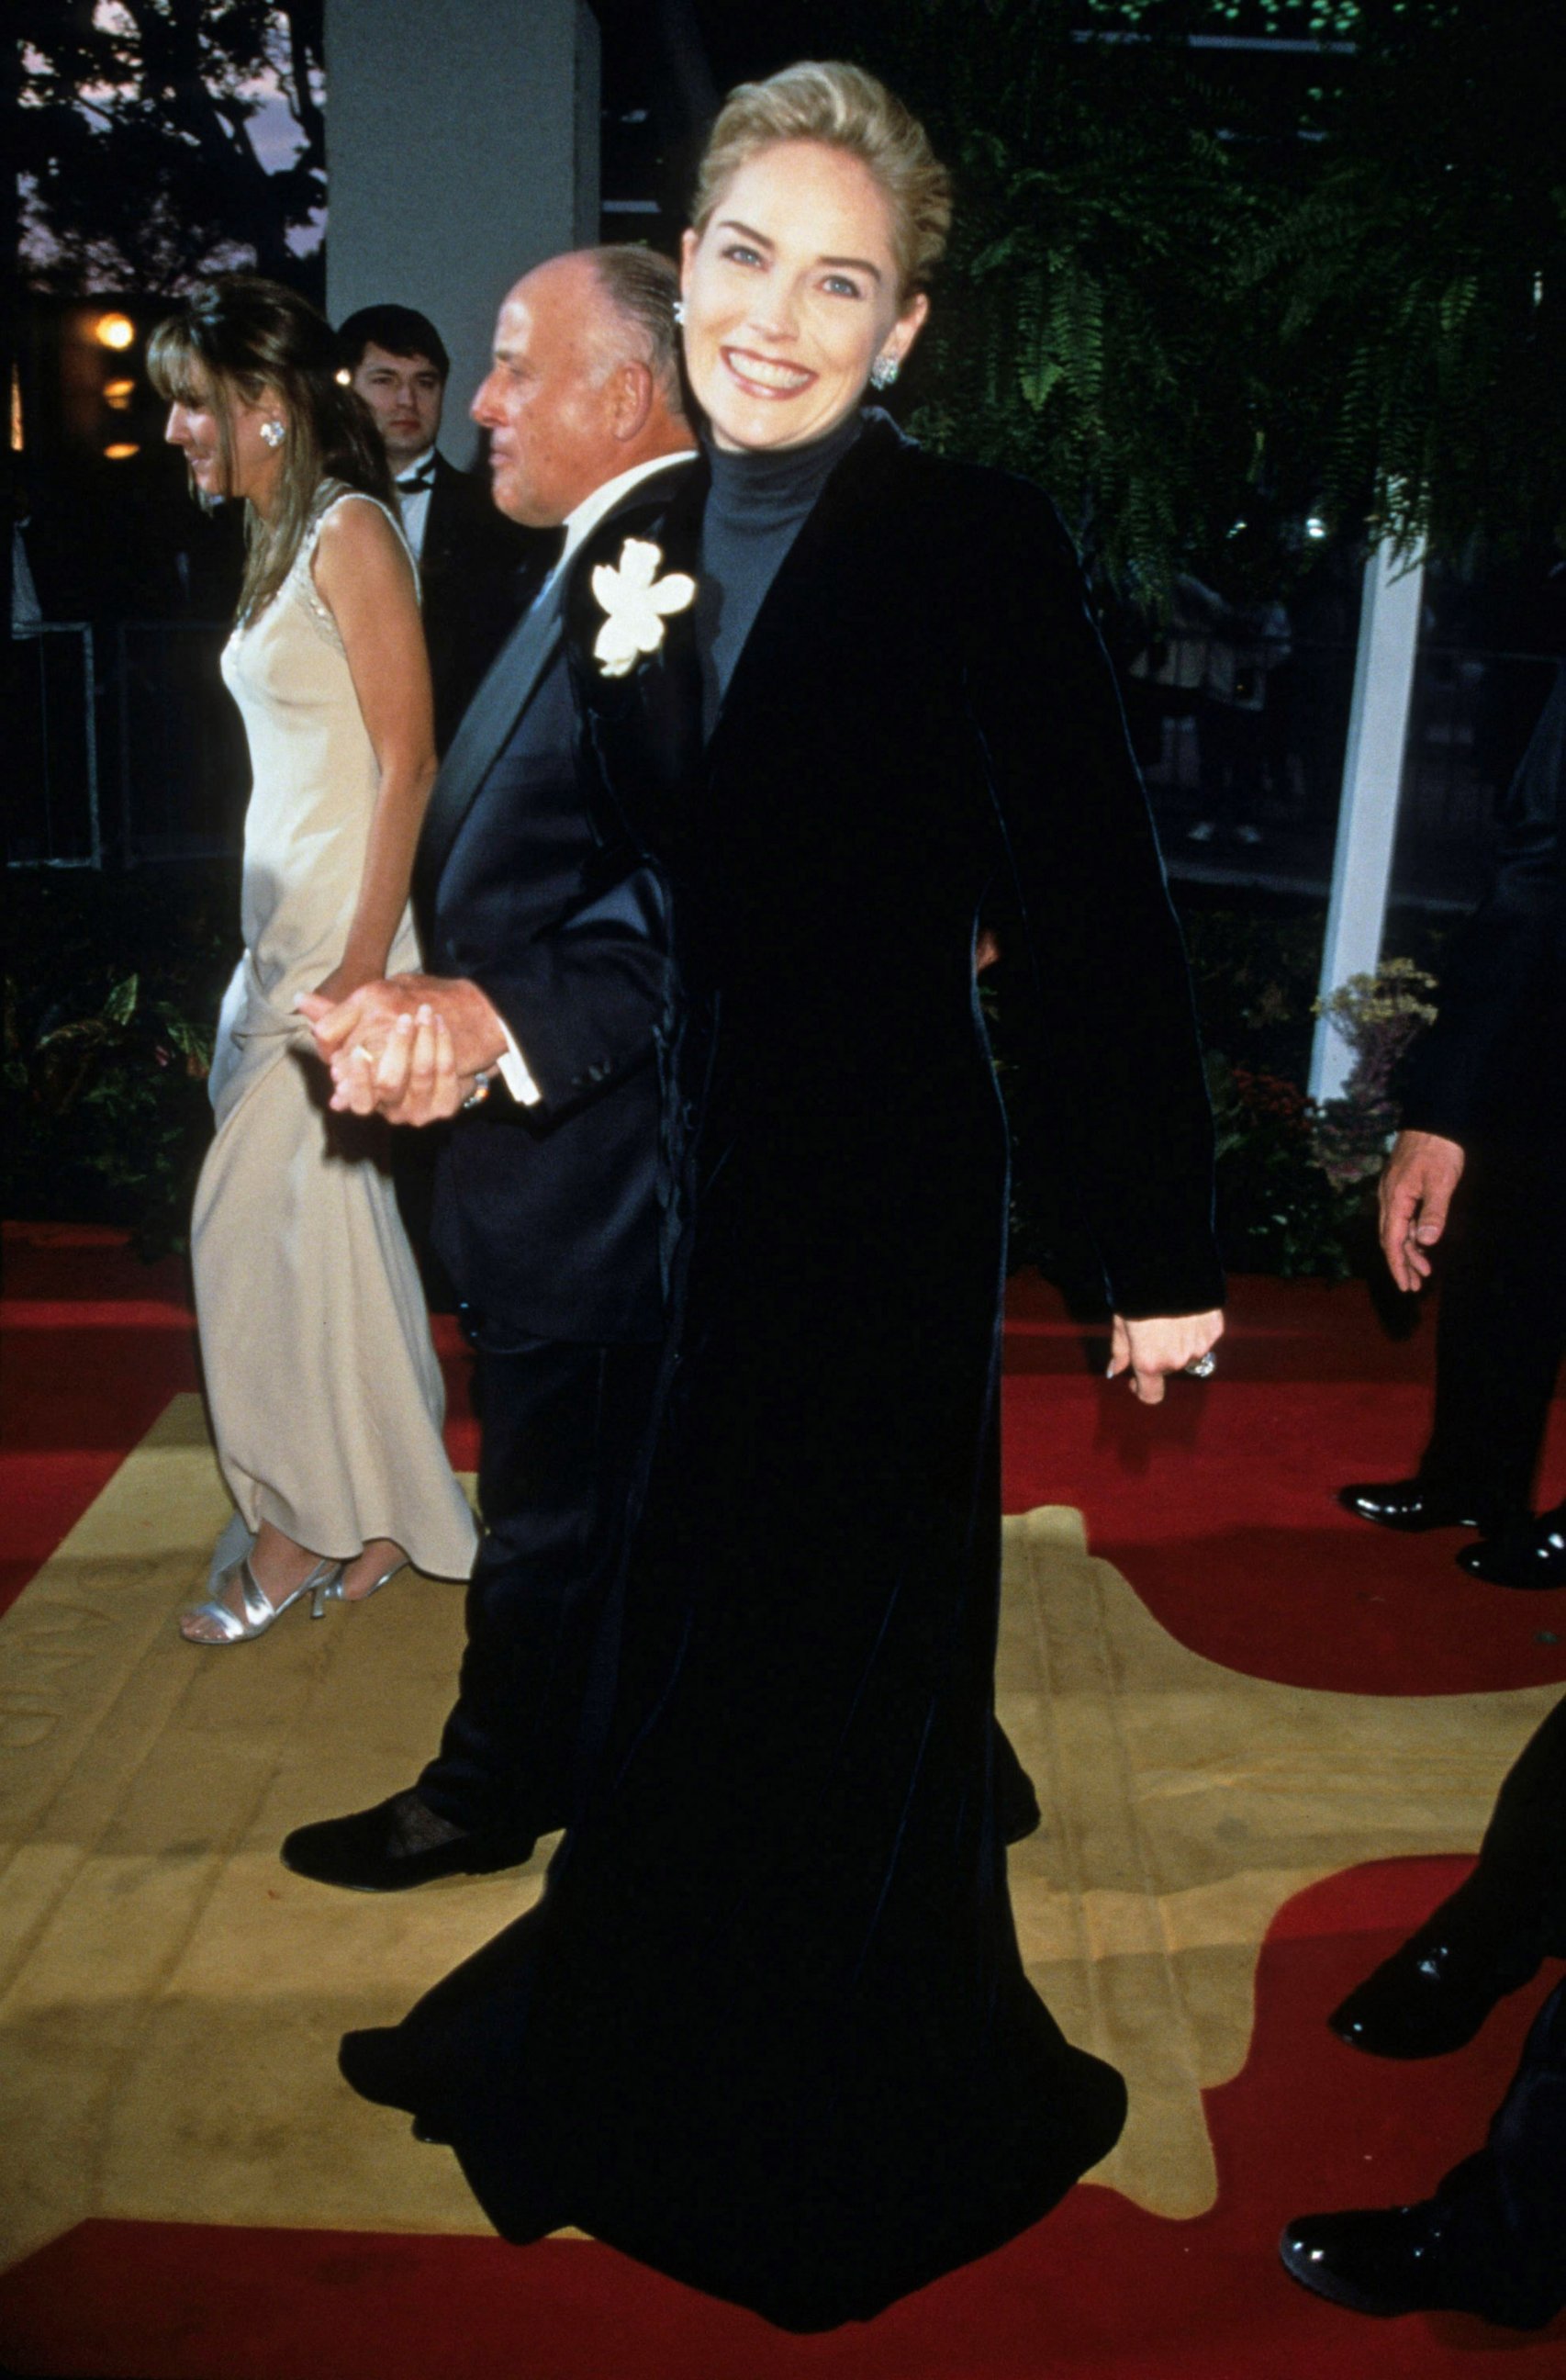 PHOTO: Sharon Stone walks the red carpet at the 68th Annual Academy Awards, March 25, 1996.